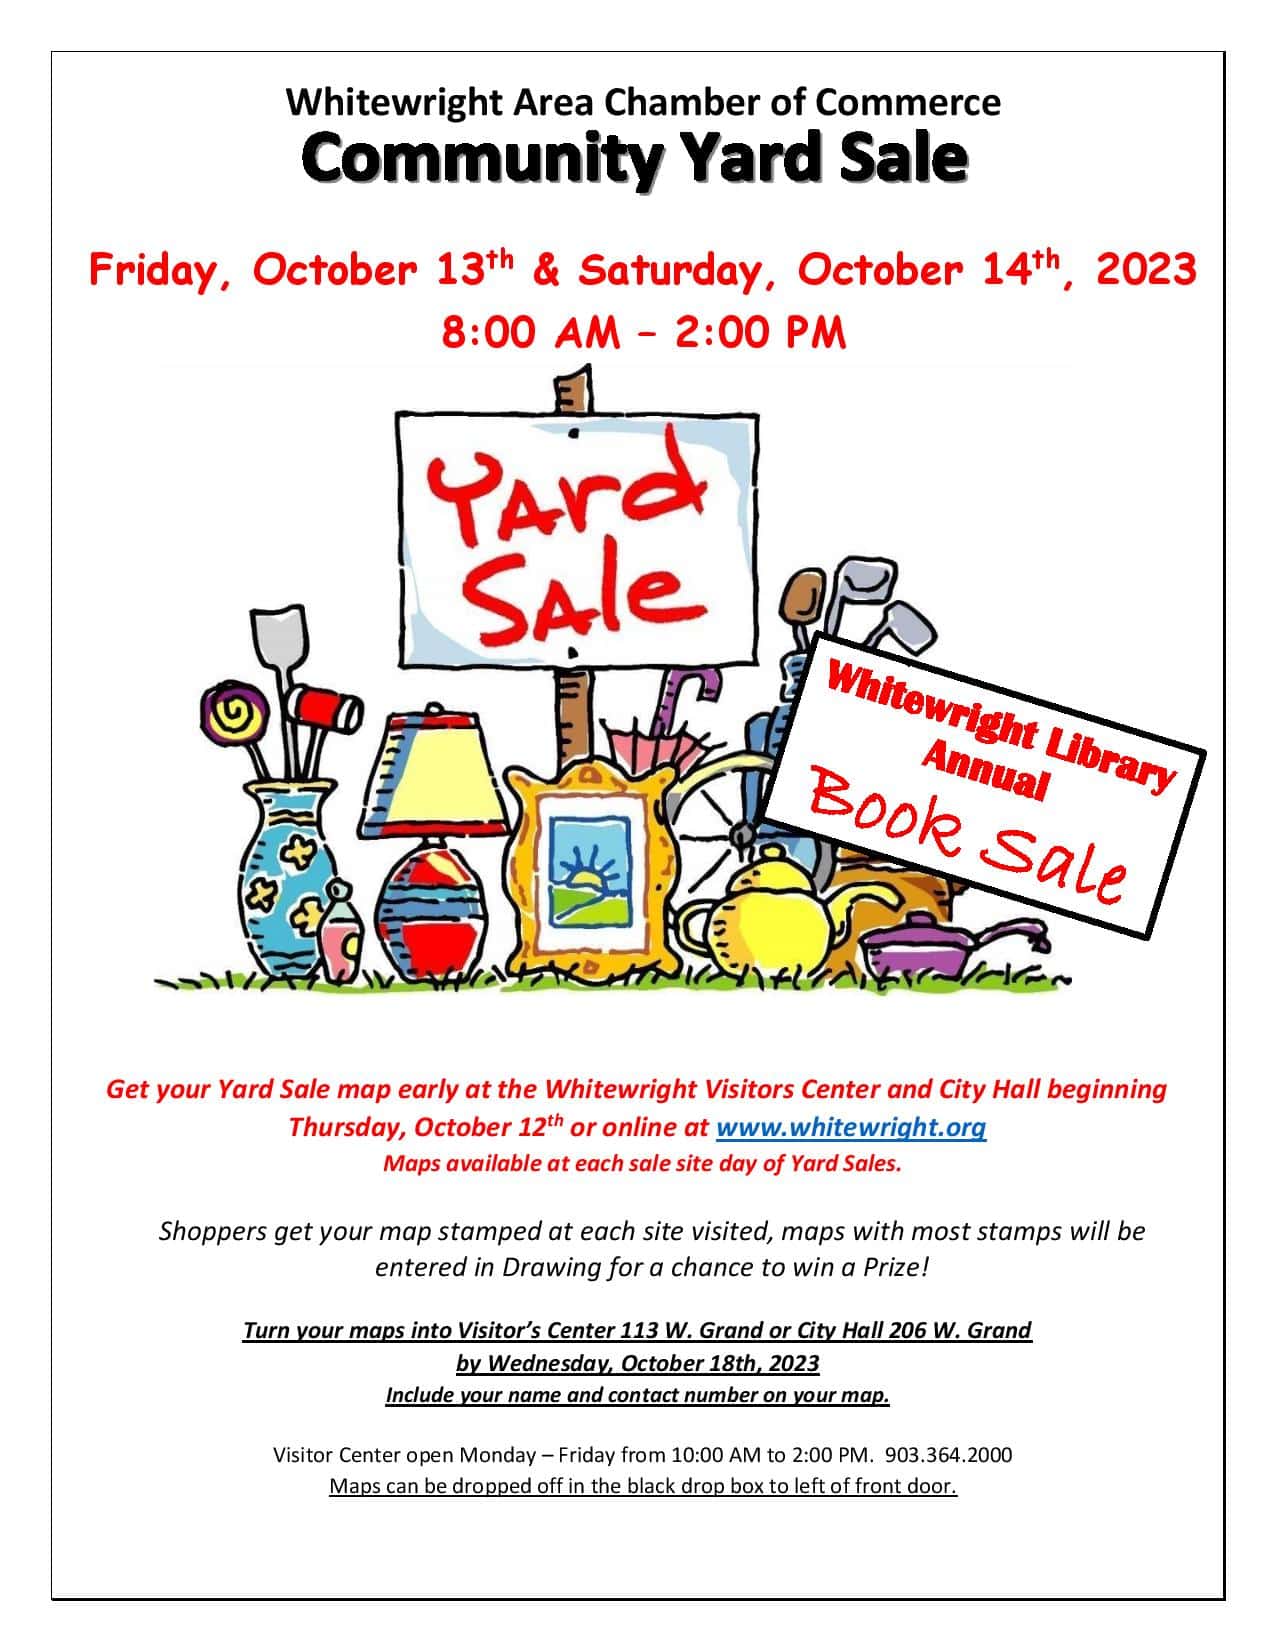 WHITEWRIGHT AREA CHAMBER OF COMMERCE - Community Yard Sale October 13th & 14th, 2023